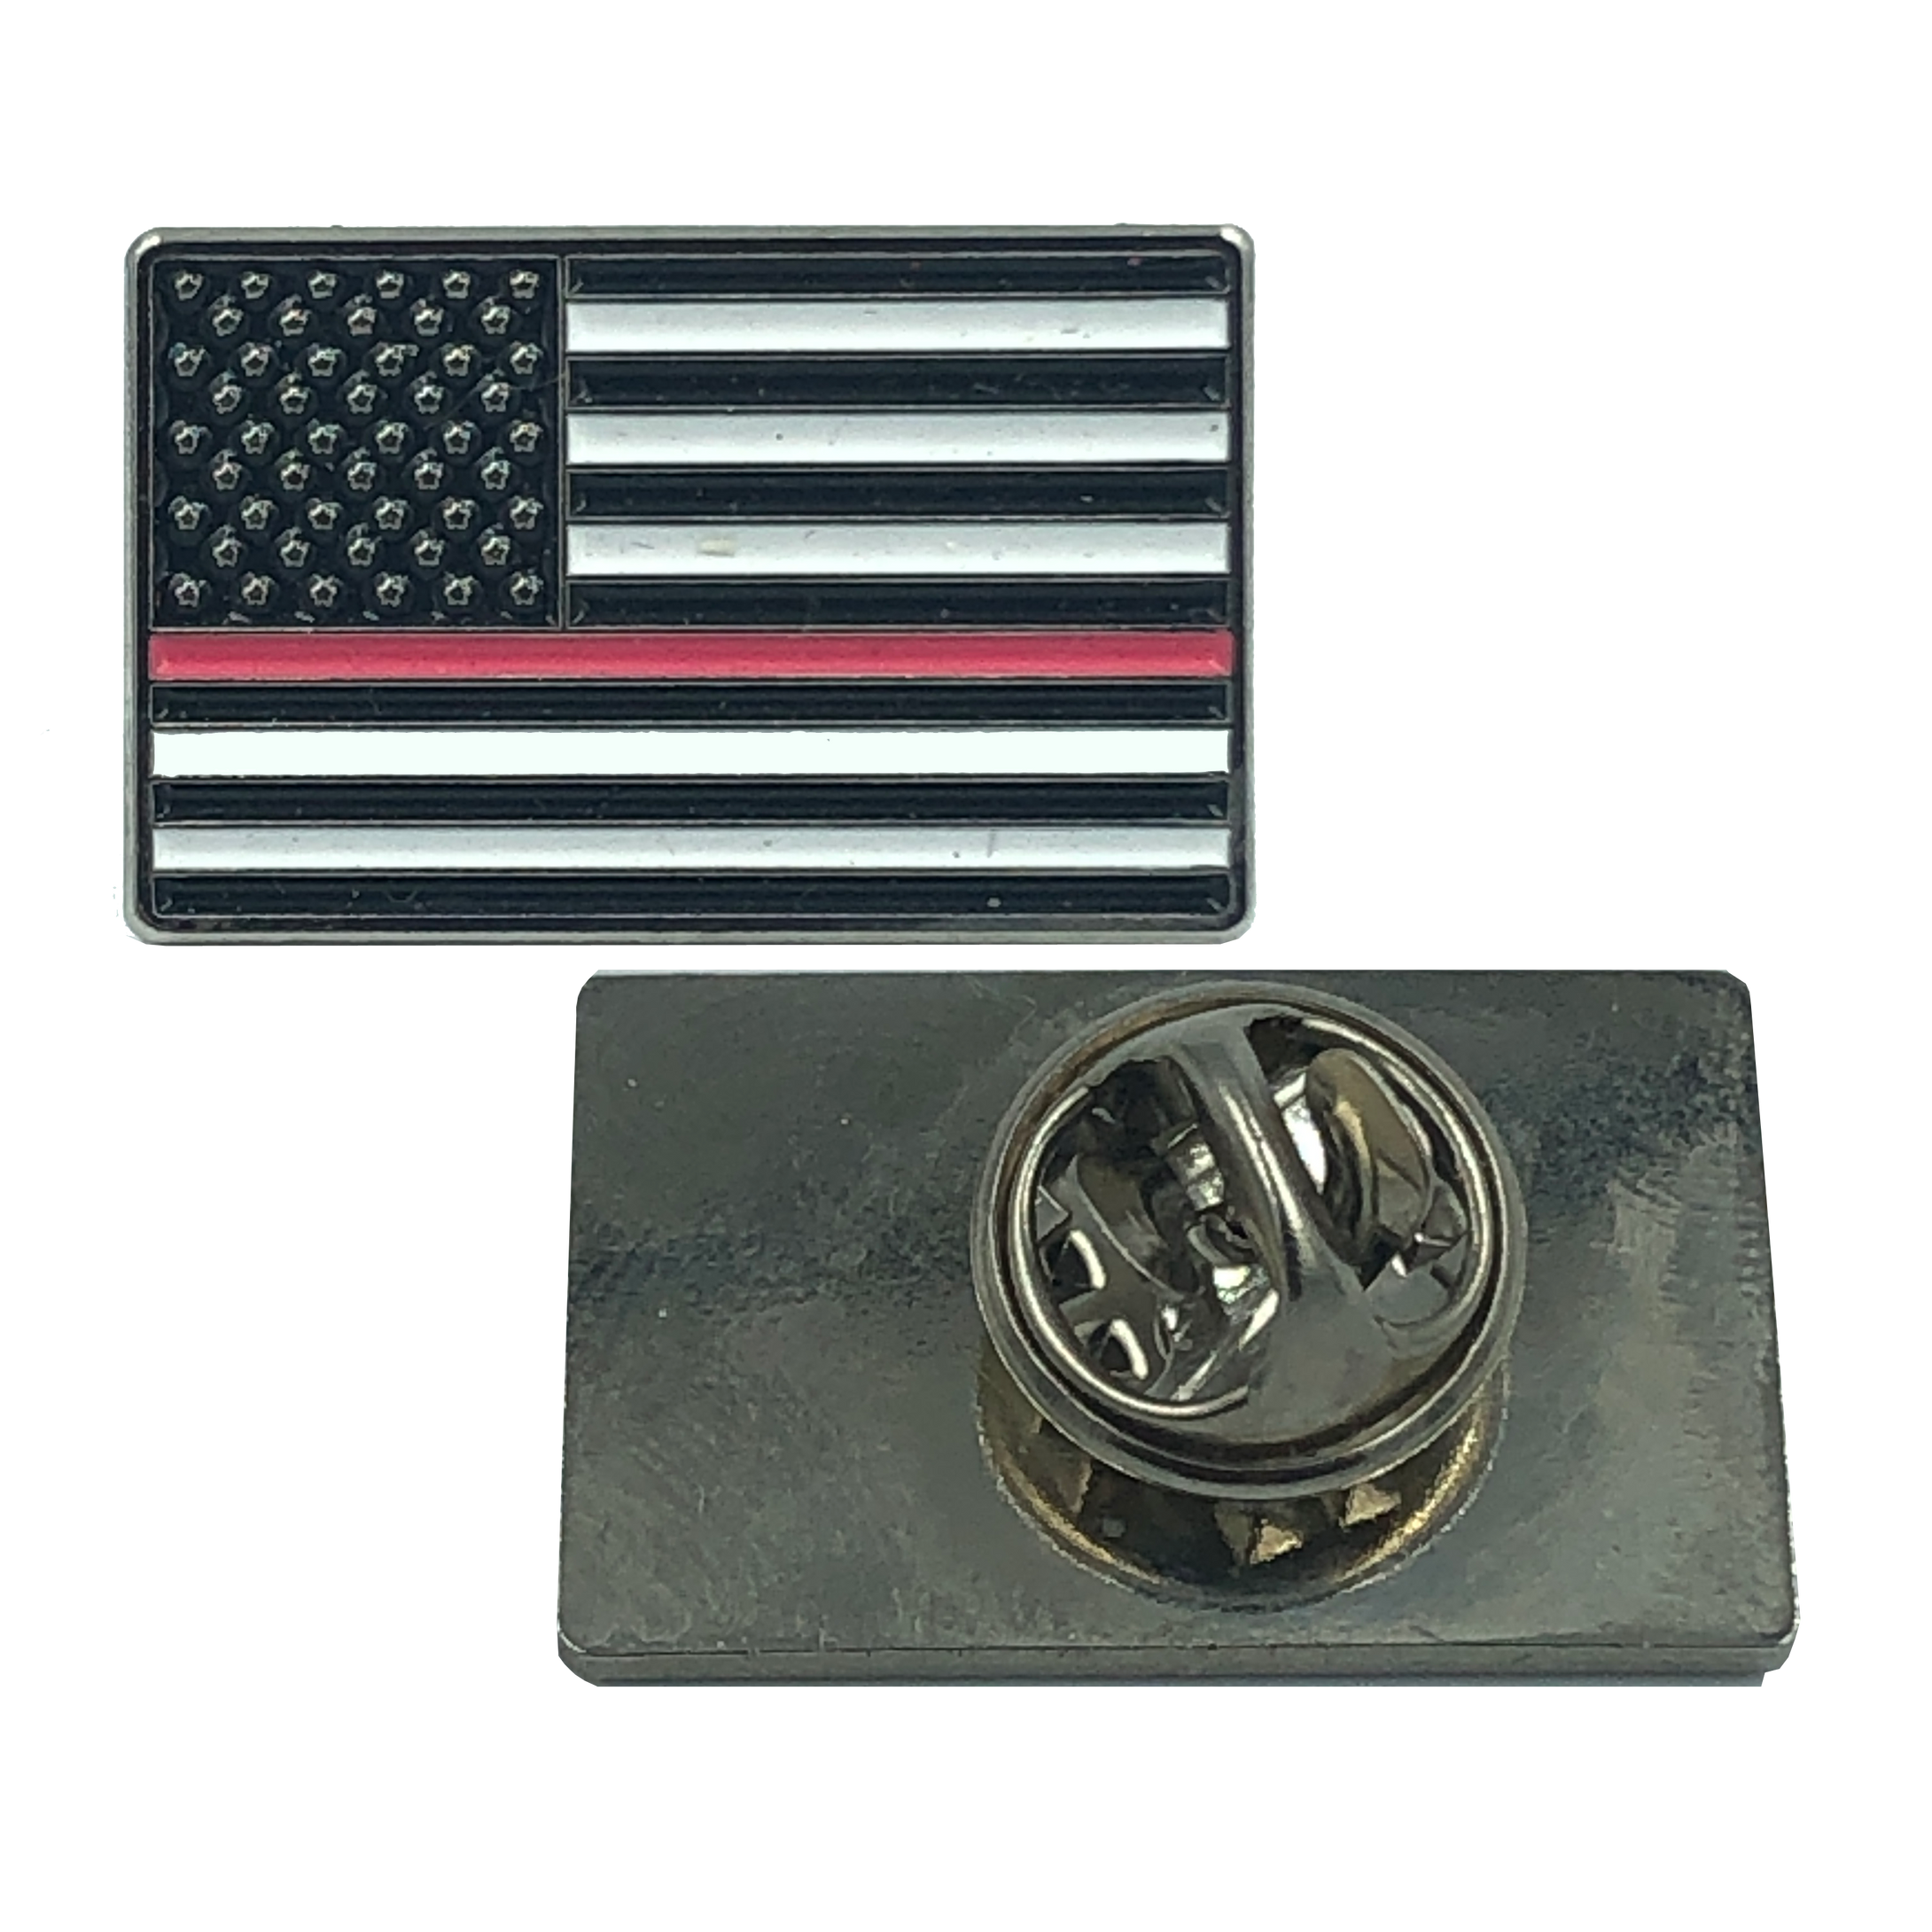 CL6-03 PINK Line Flag Pin: Breast Cancer Awareness Police Uniform Thin Pink Line